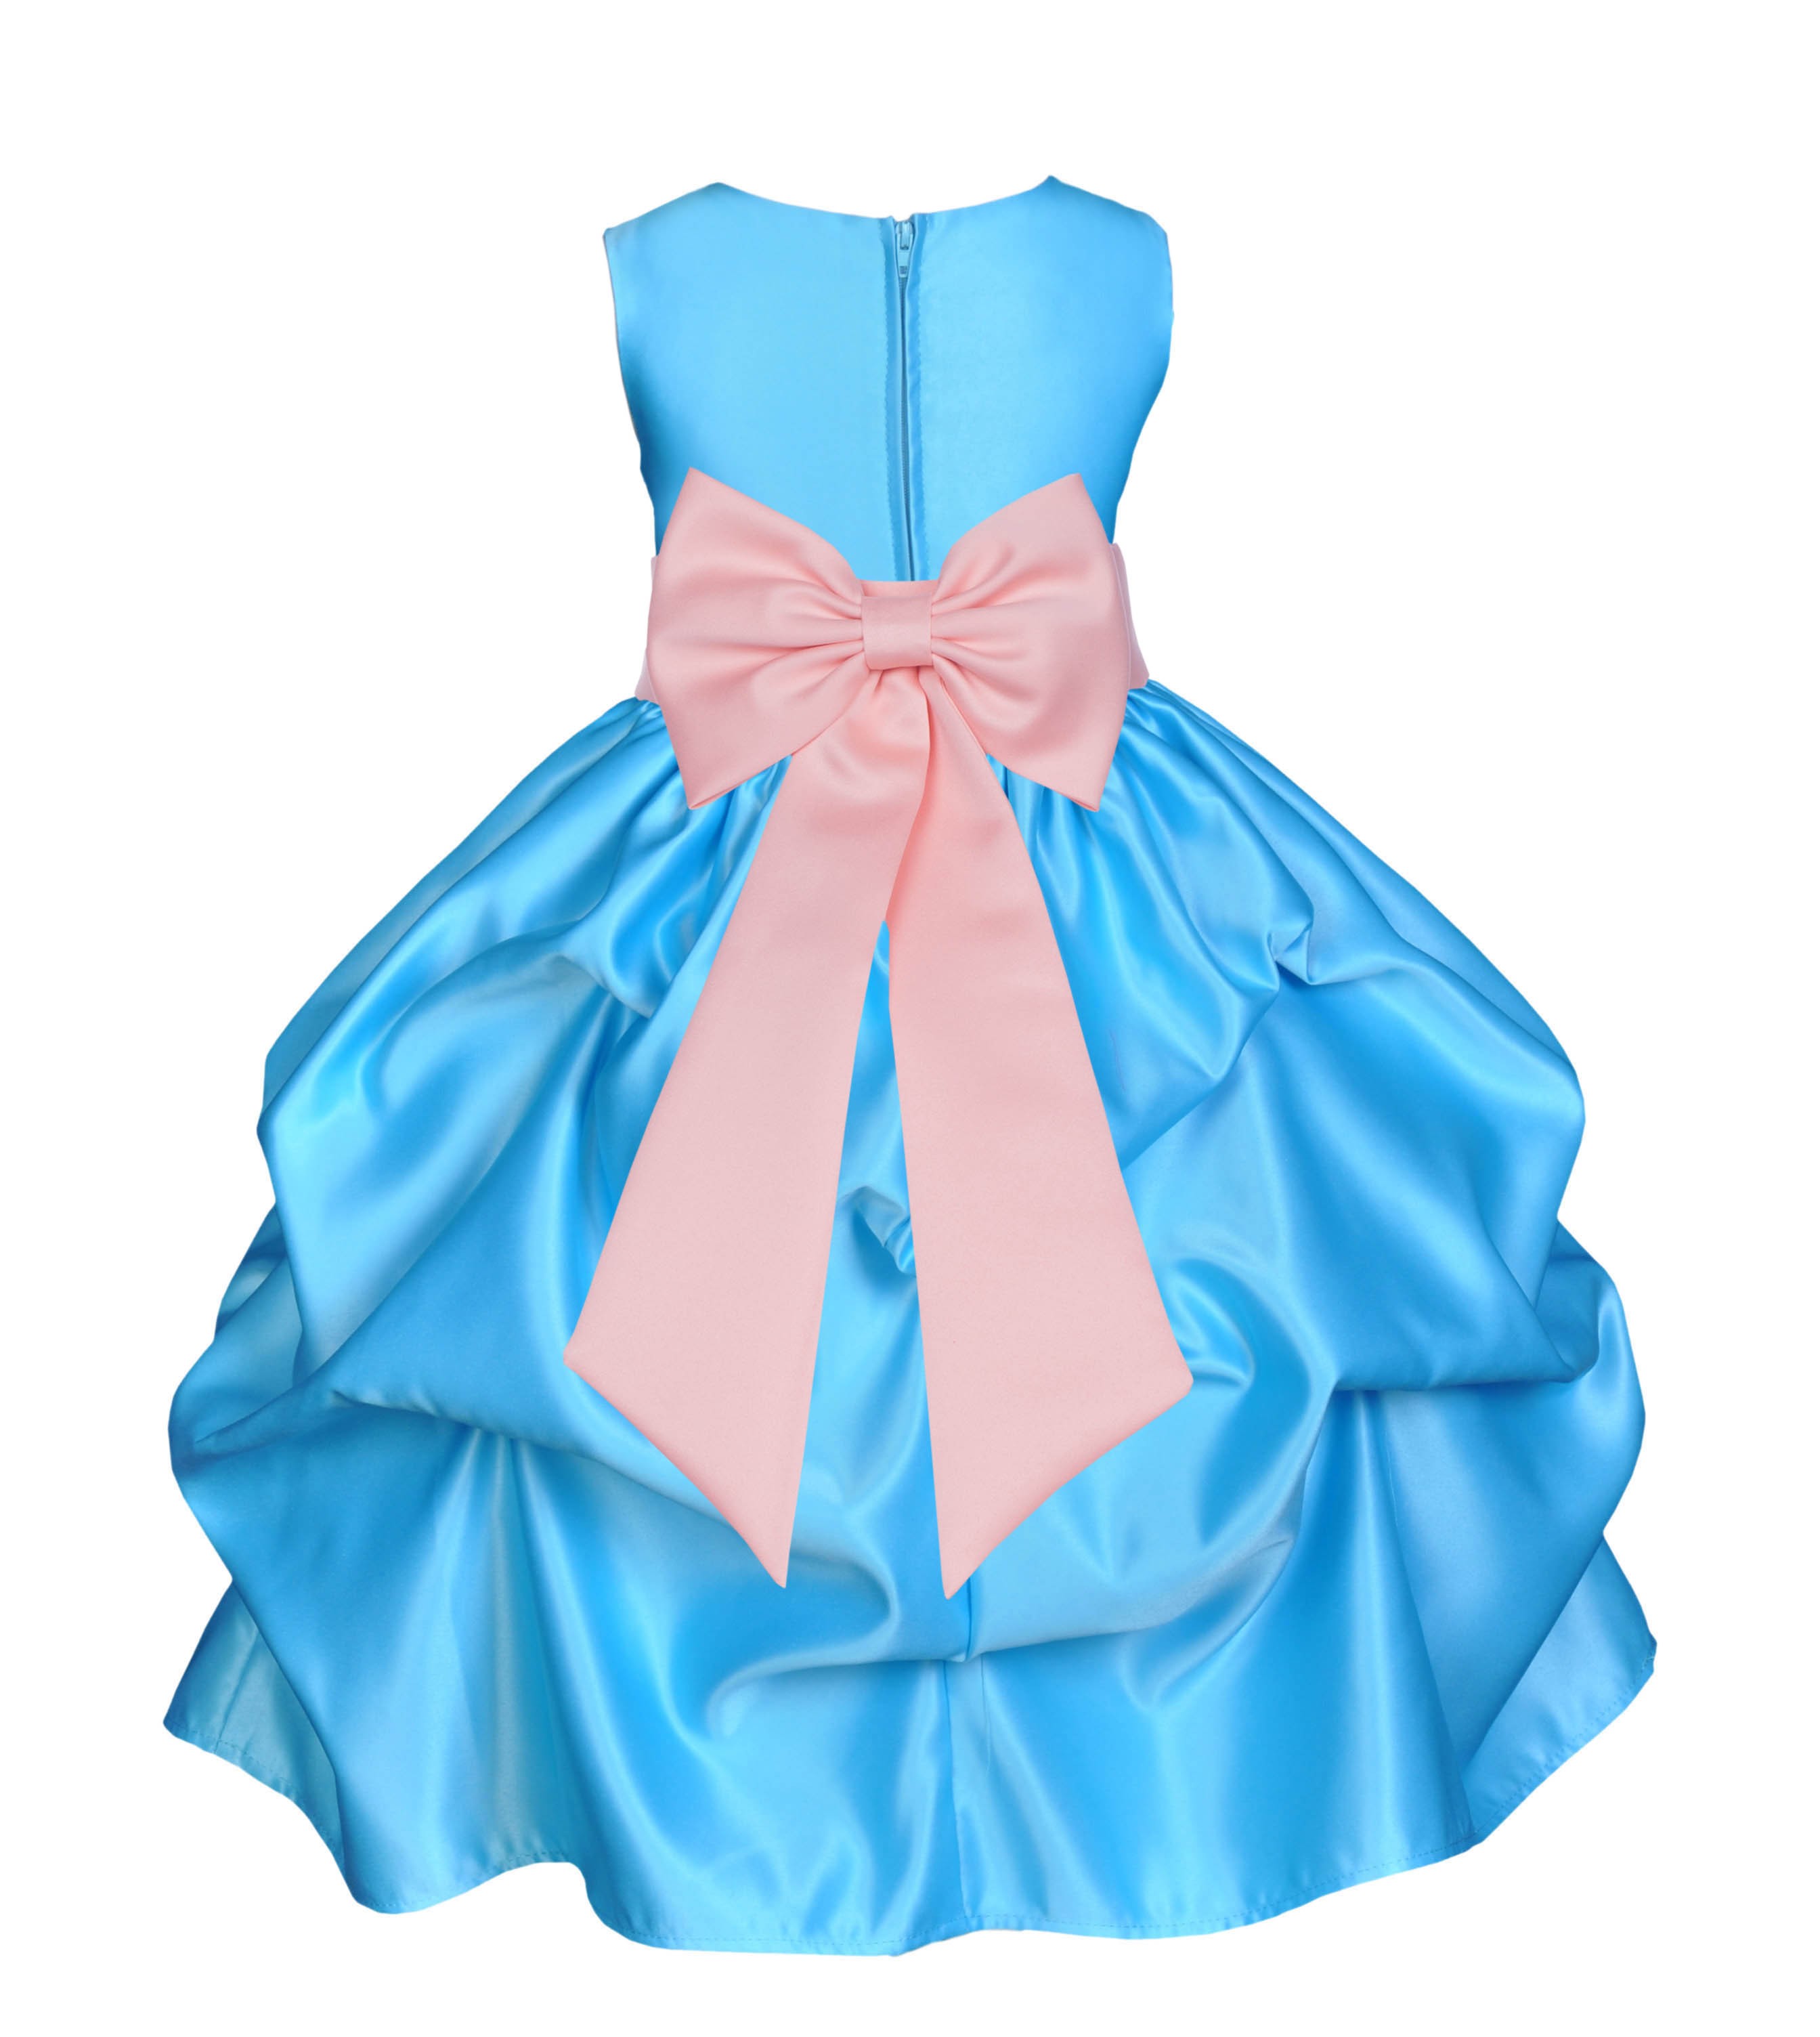 Turquoise/Peach Satin Pick-Up Flower Girl Dress Receptions 208T